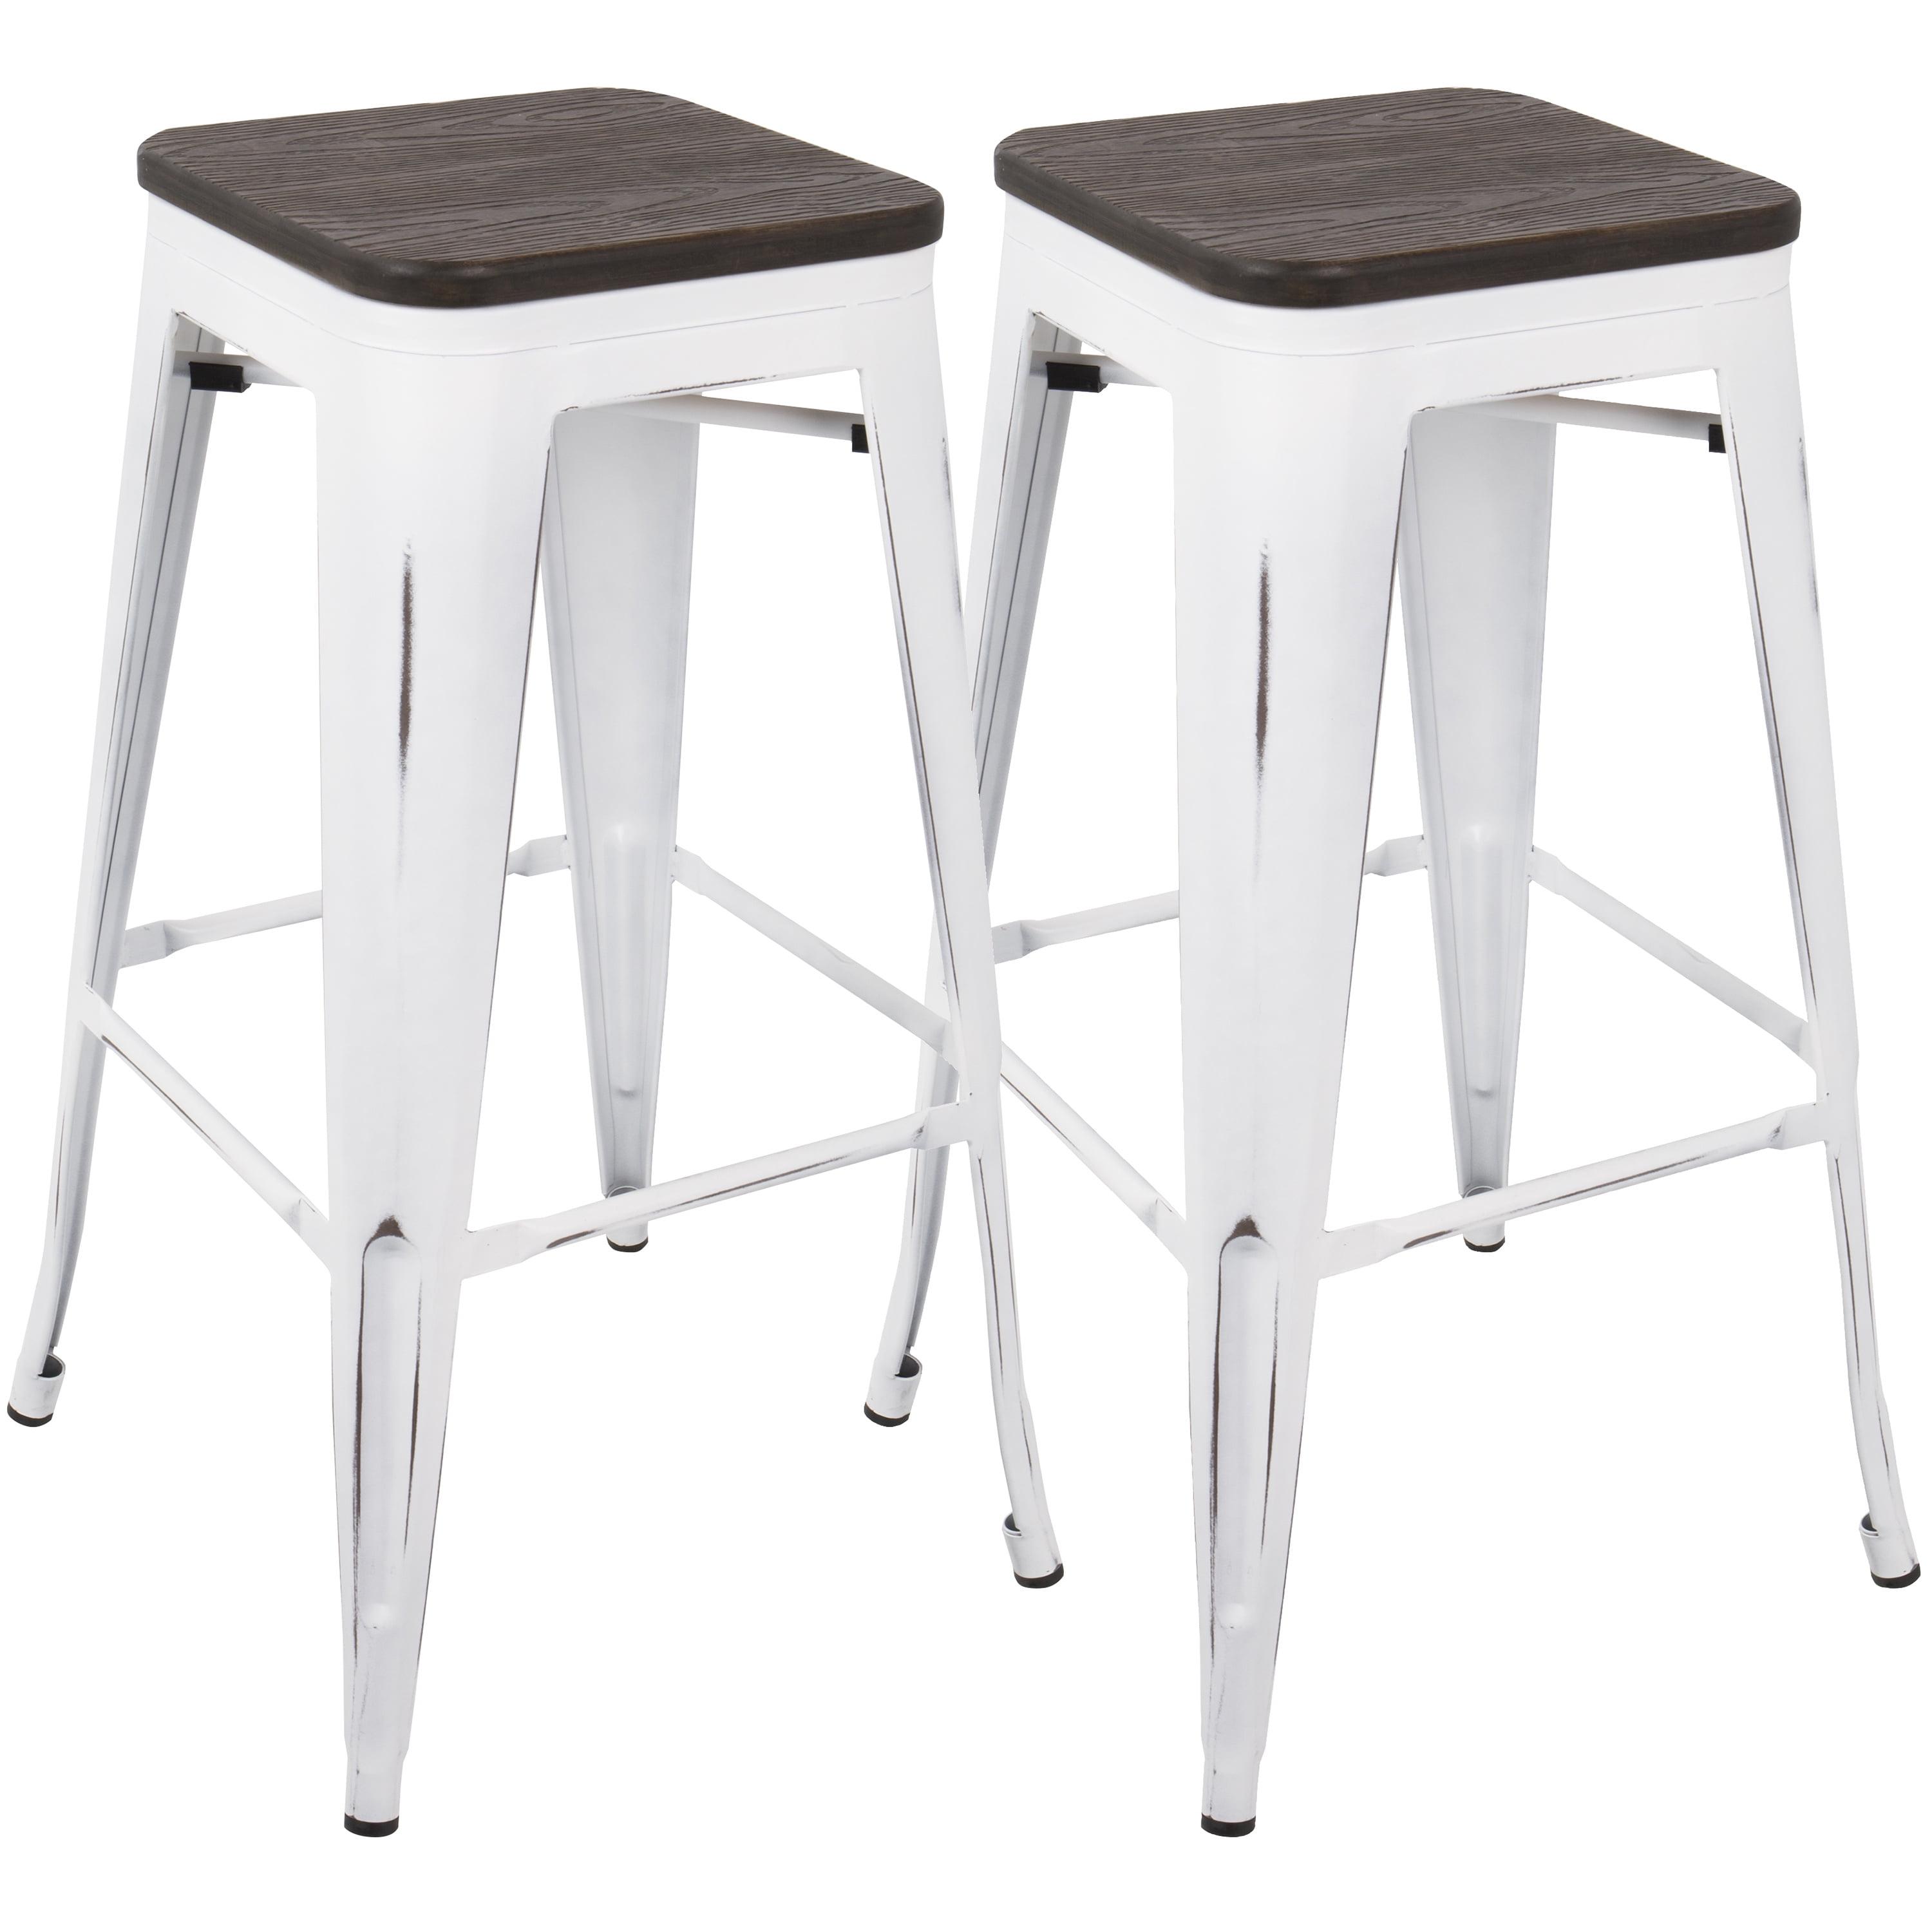 Vintage White & Espresso Industrial 30" Backless Stool with Footrest